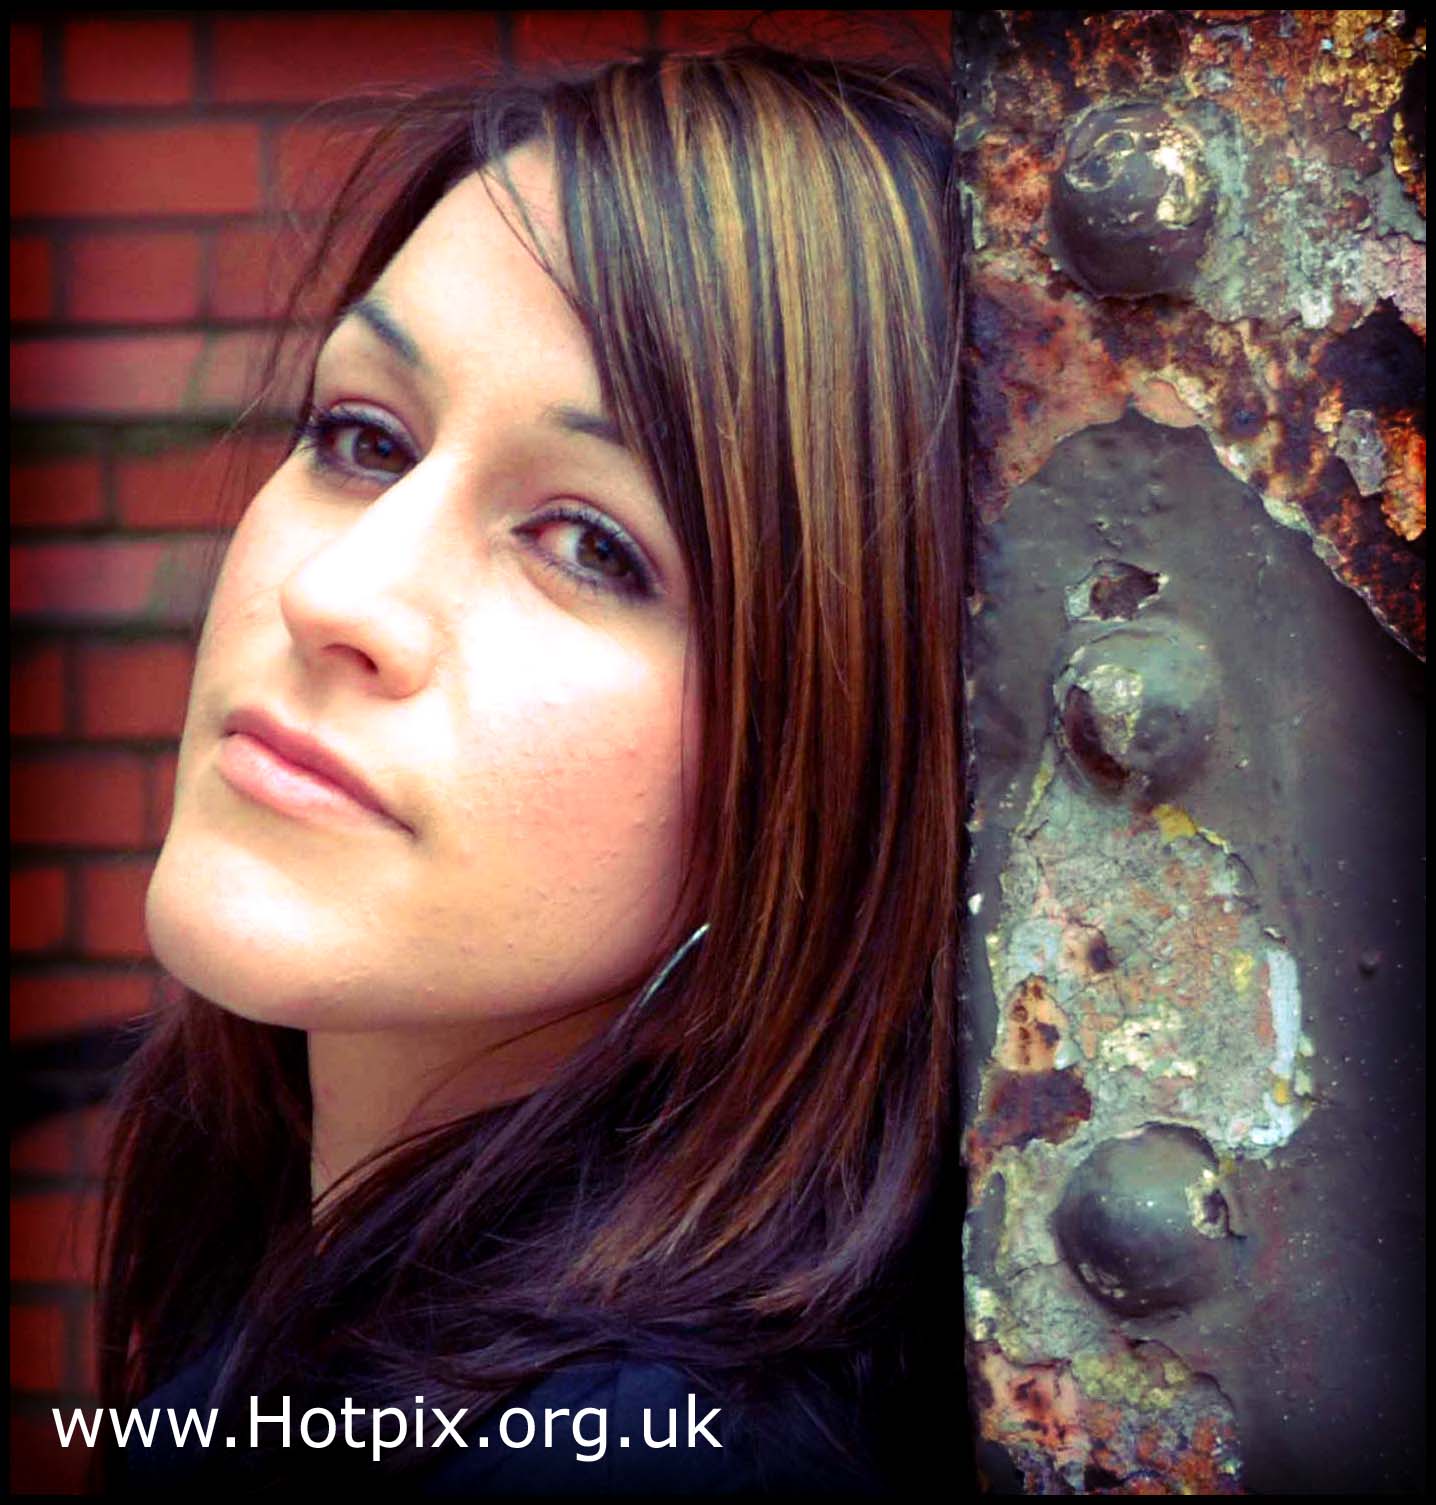 music,band,unsigned,manchester,UK,Tony,Smith,TonySmith,hotpix,musician,vocalist,female,bands,gigs,gig,stage,performer,rock,indie,player,cool,person,people,portrait,image,hotpicks,MIS,@hotpixUK,ActiveH,housingtechnology